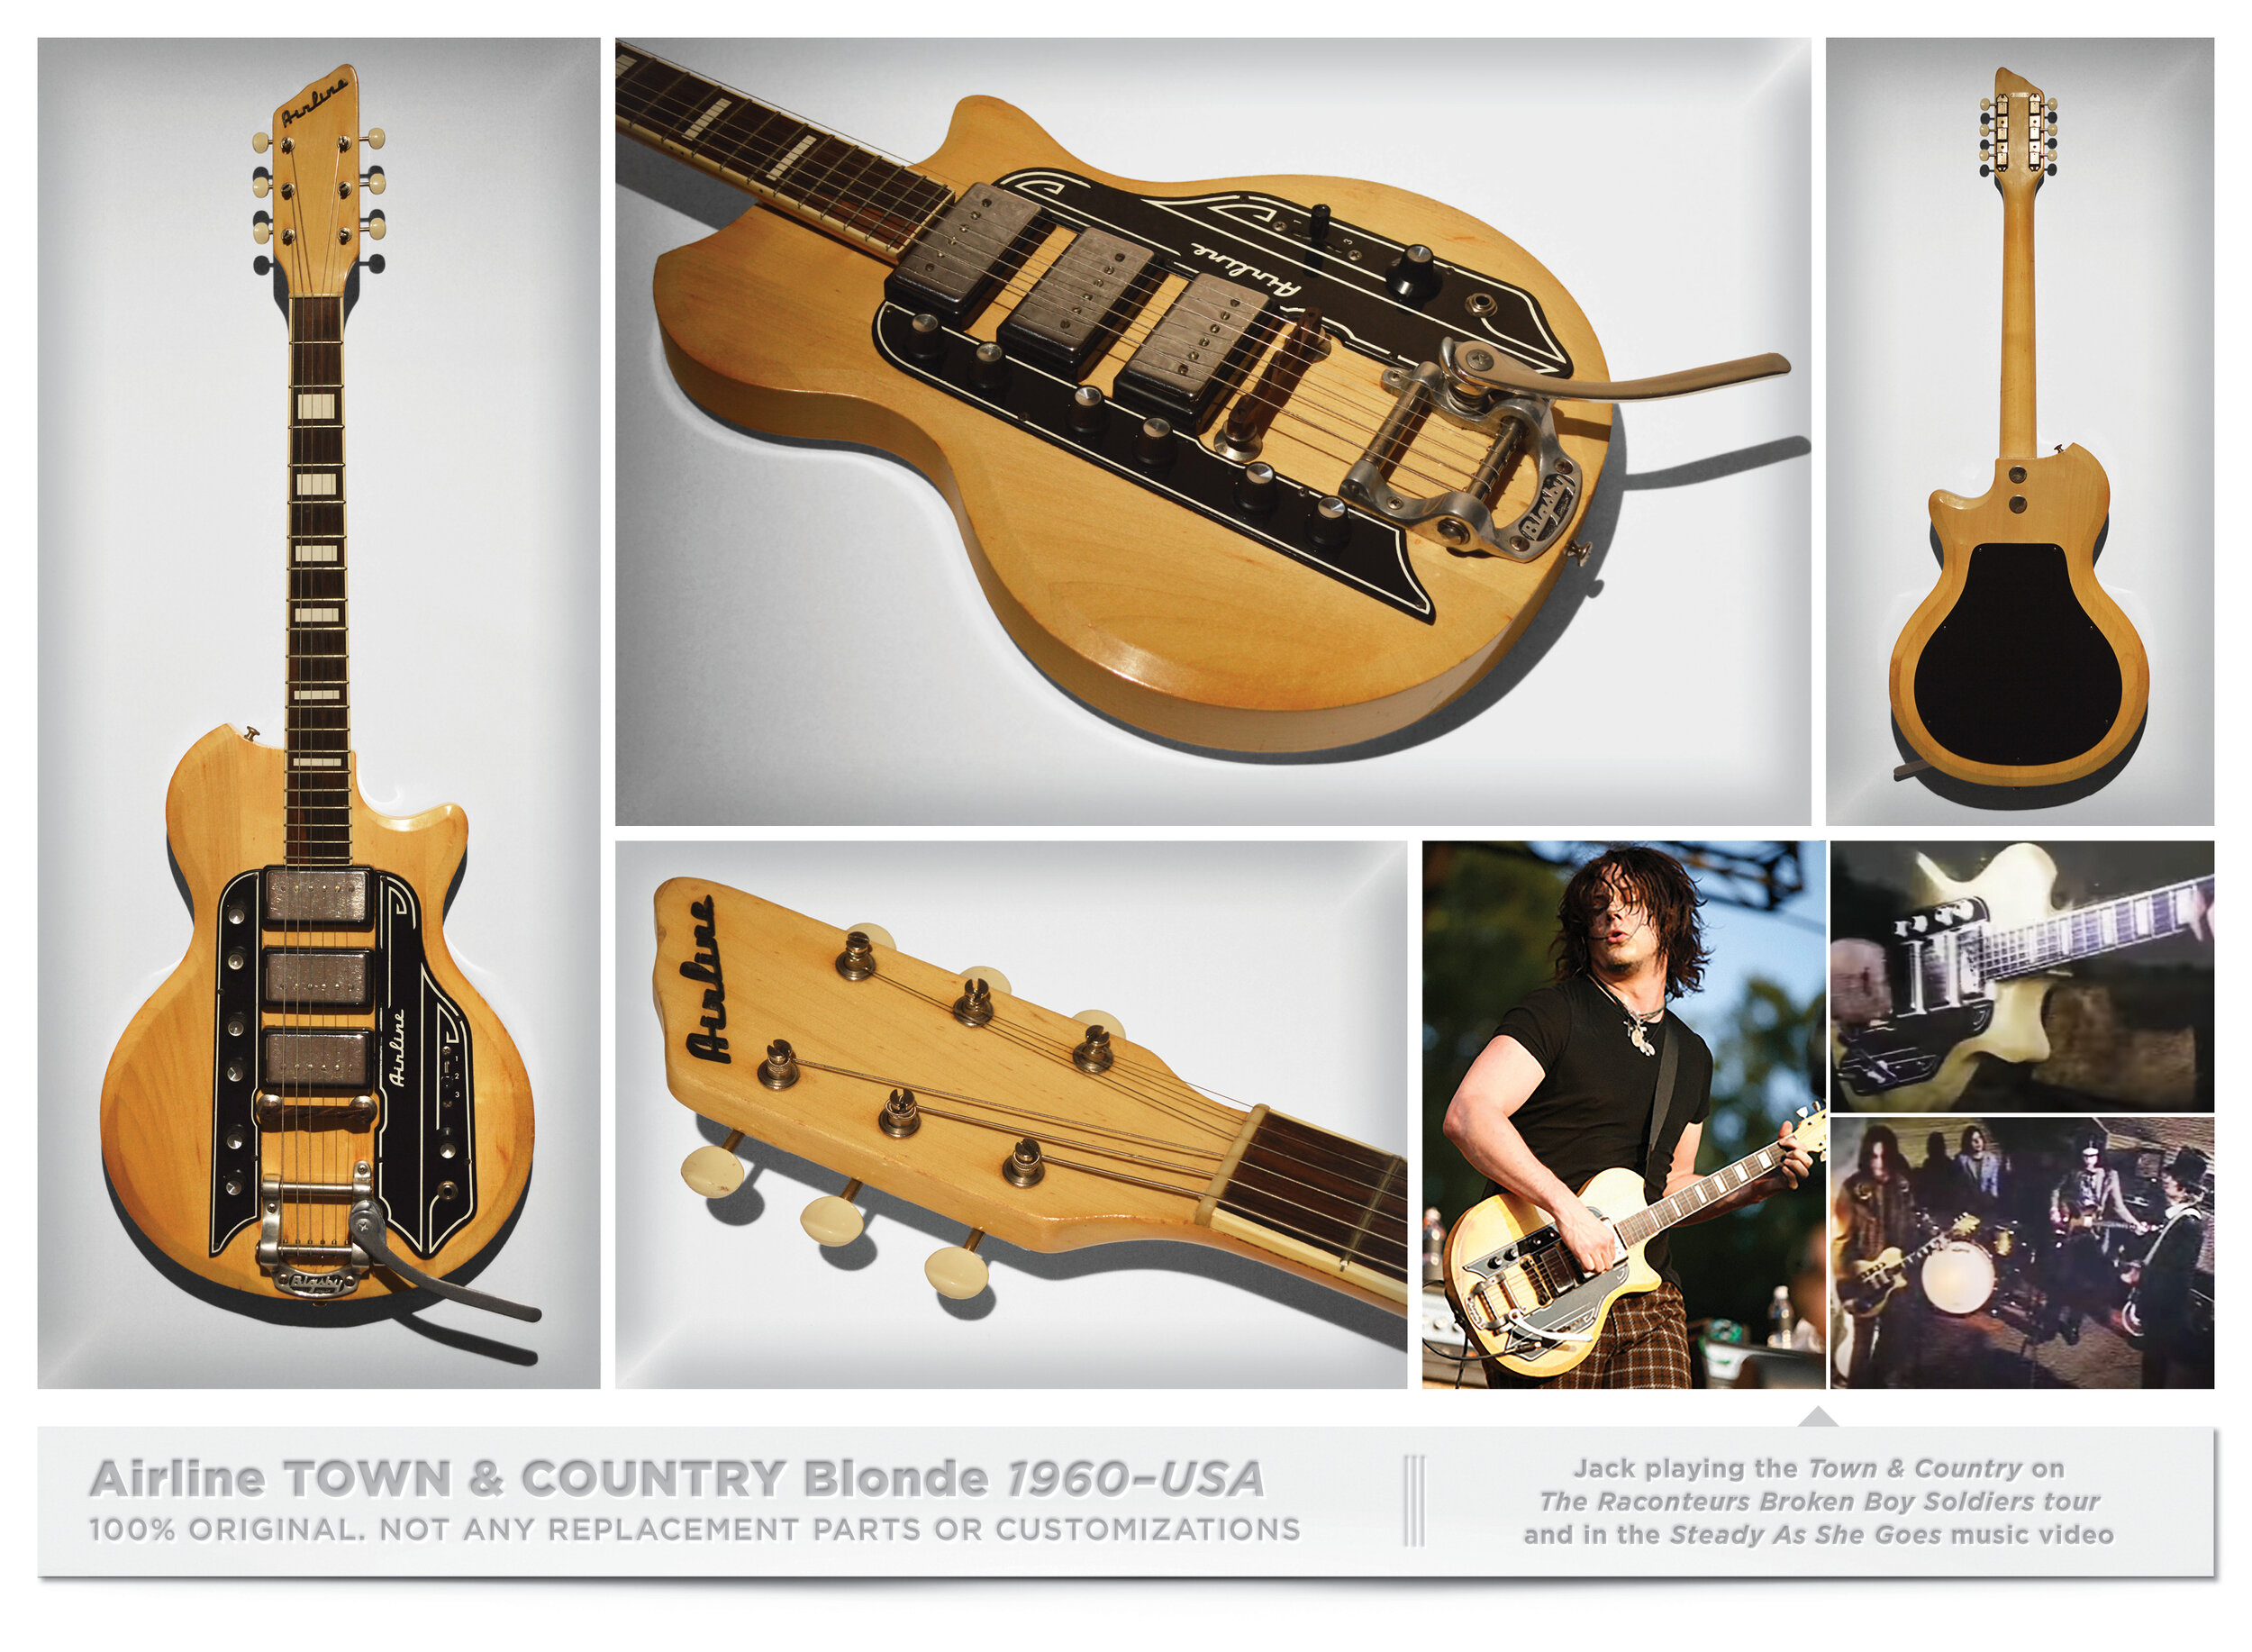 6 Airline TOWN & COUNTRY Blonde 1960–USA THE JACK WHITE GUITAR COLLECTION FINAL LAYOUT6.jpg